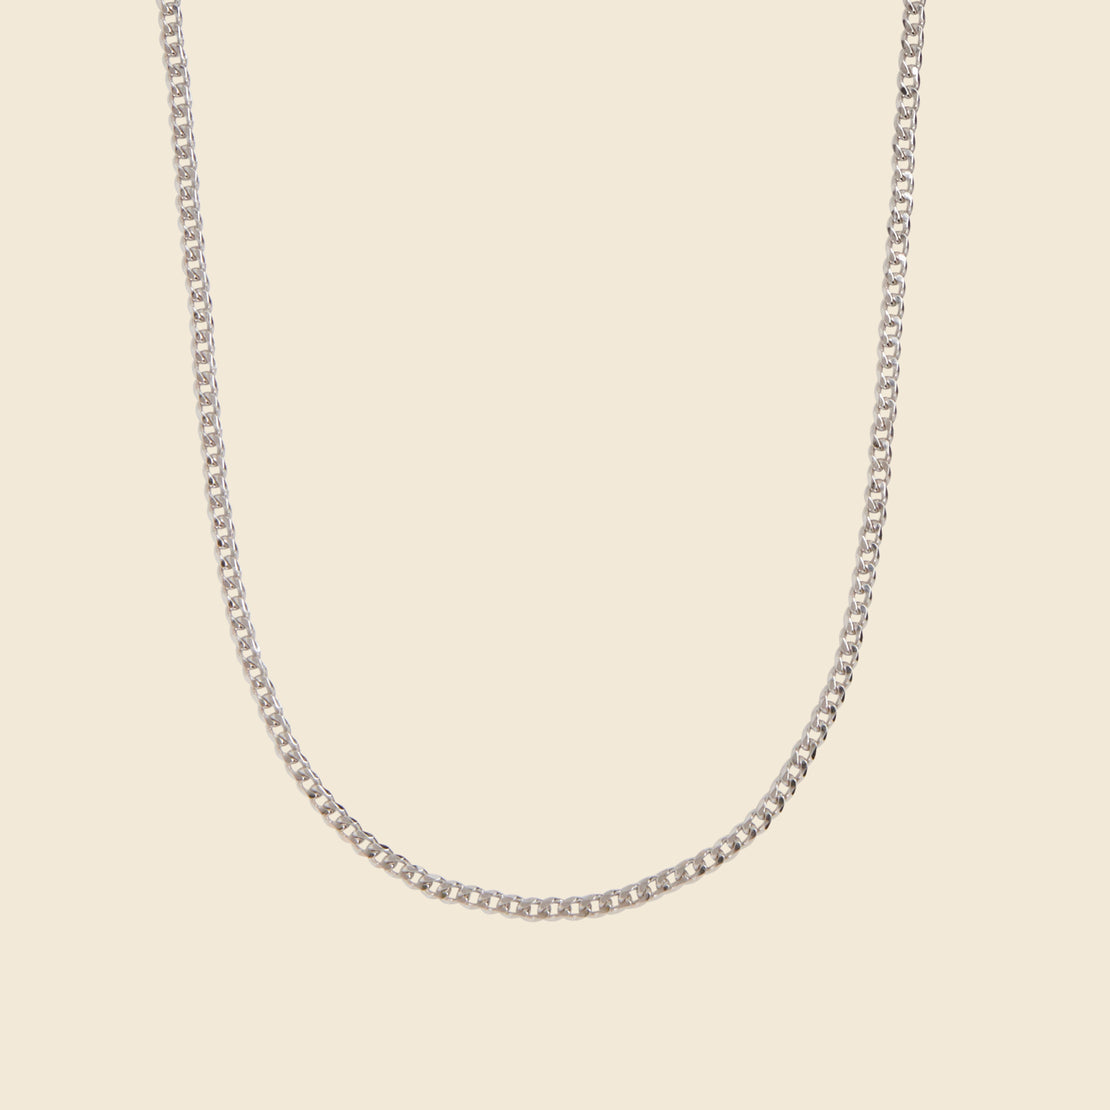 3mm Cuban Chain Necklace - Sterling Silver - Miansai - STAG Provisions - Accessories - Necklaces